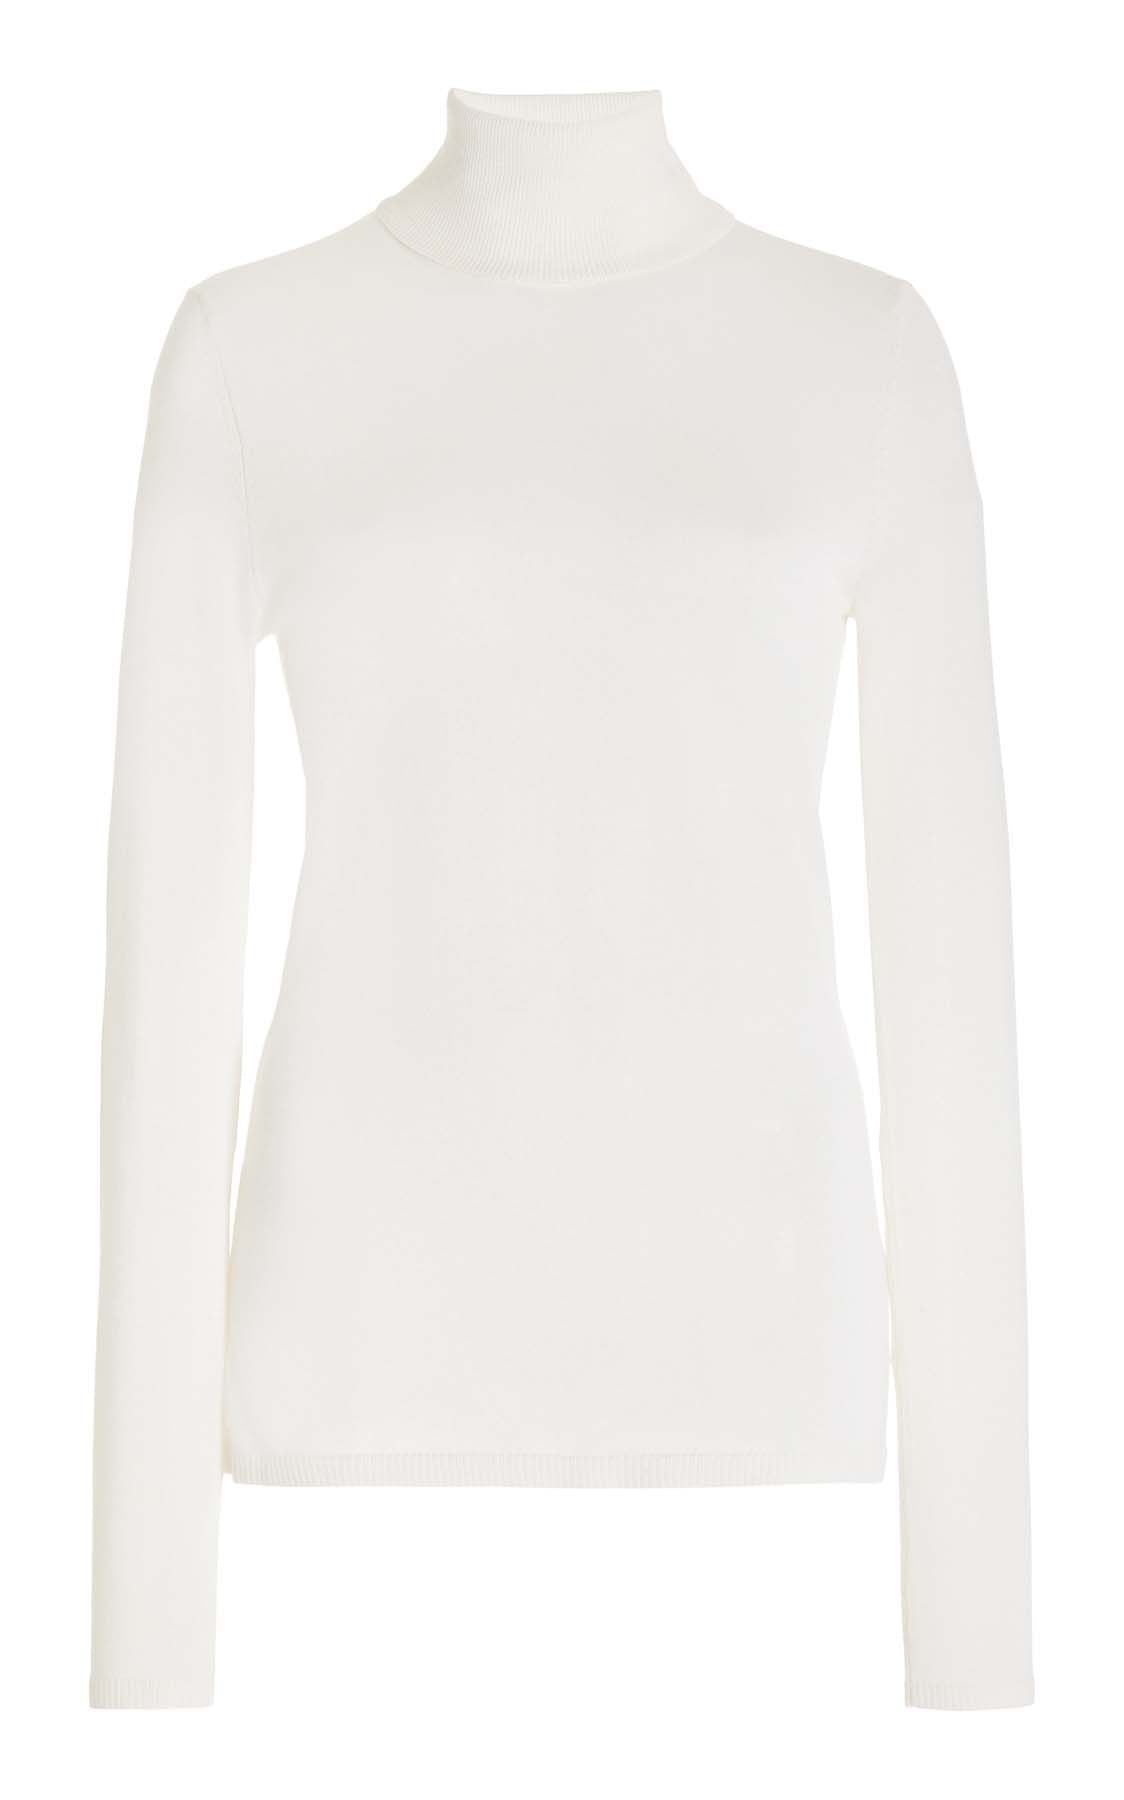 May Knit Turtleneck in Ivory Merino Wool Cashmere